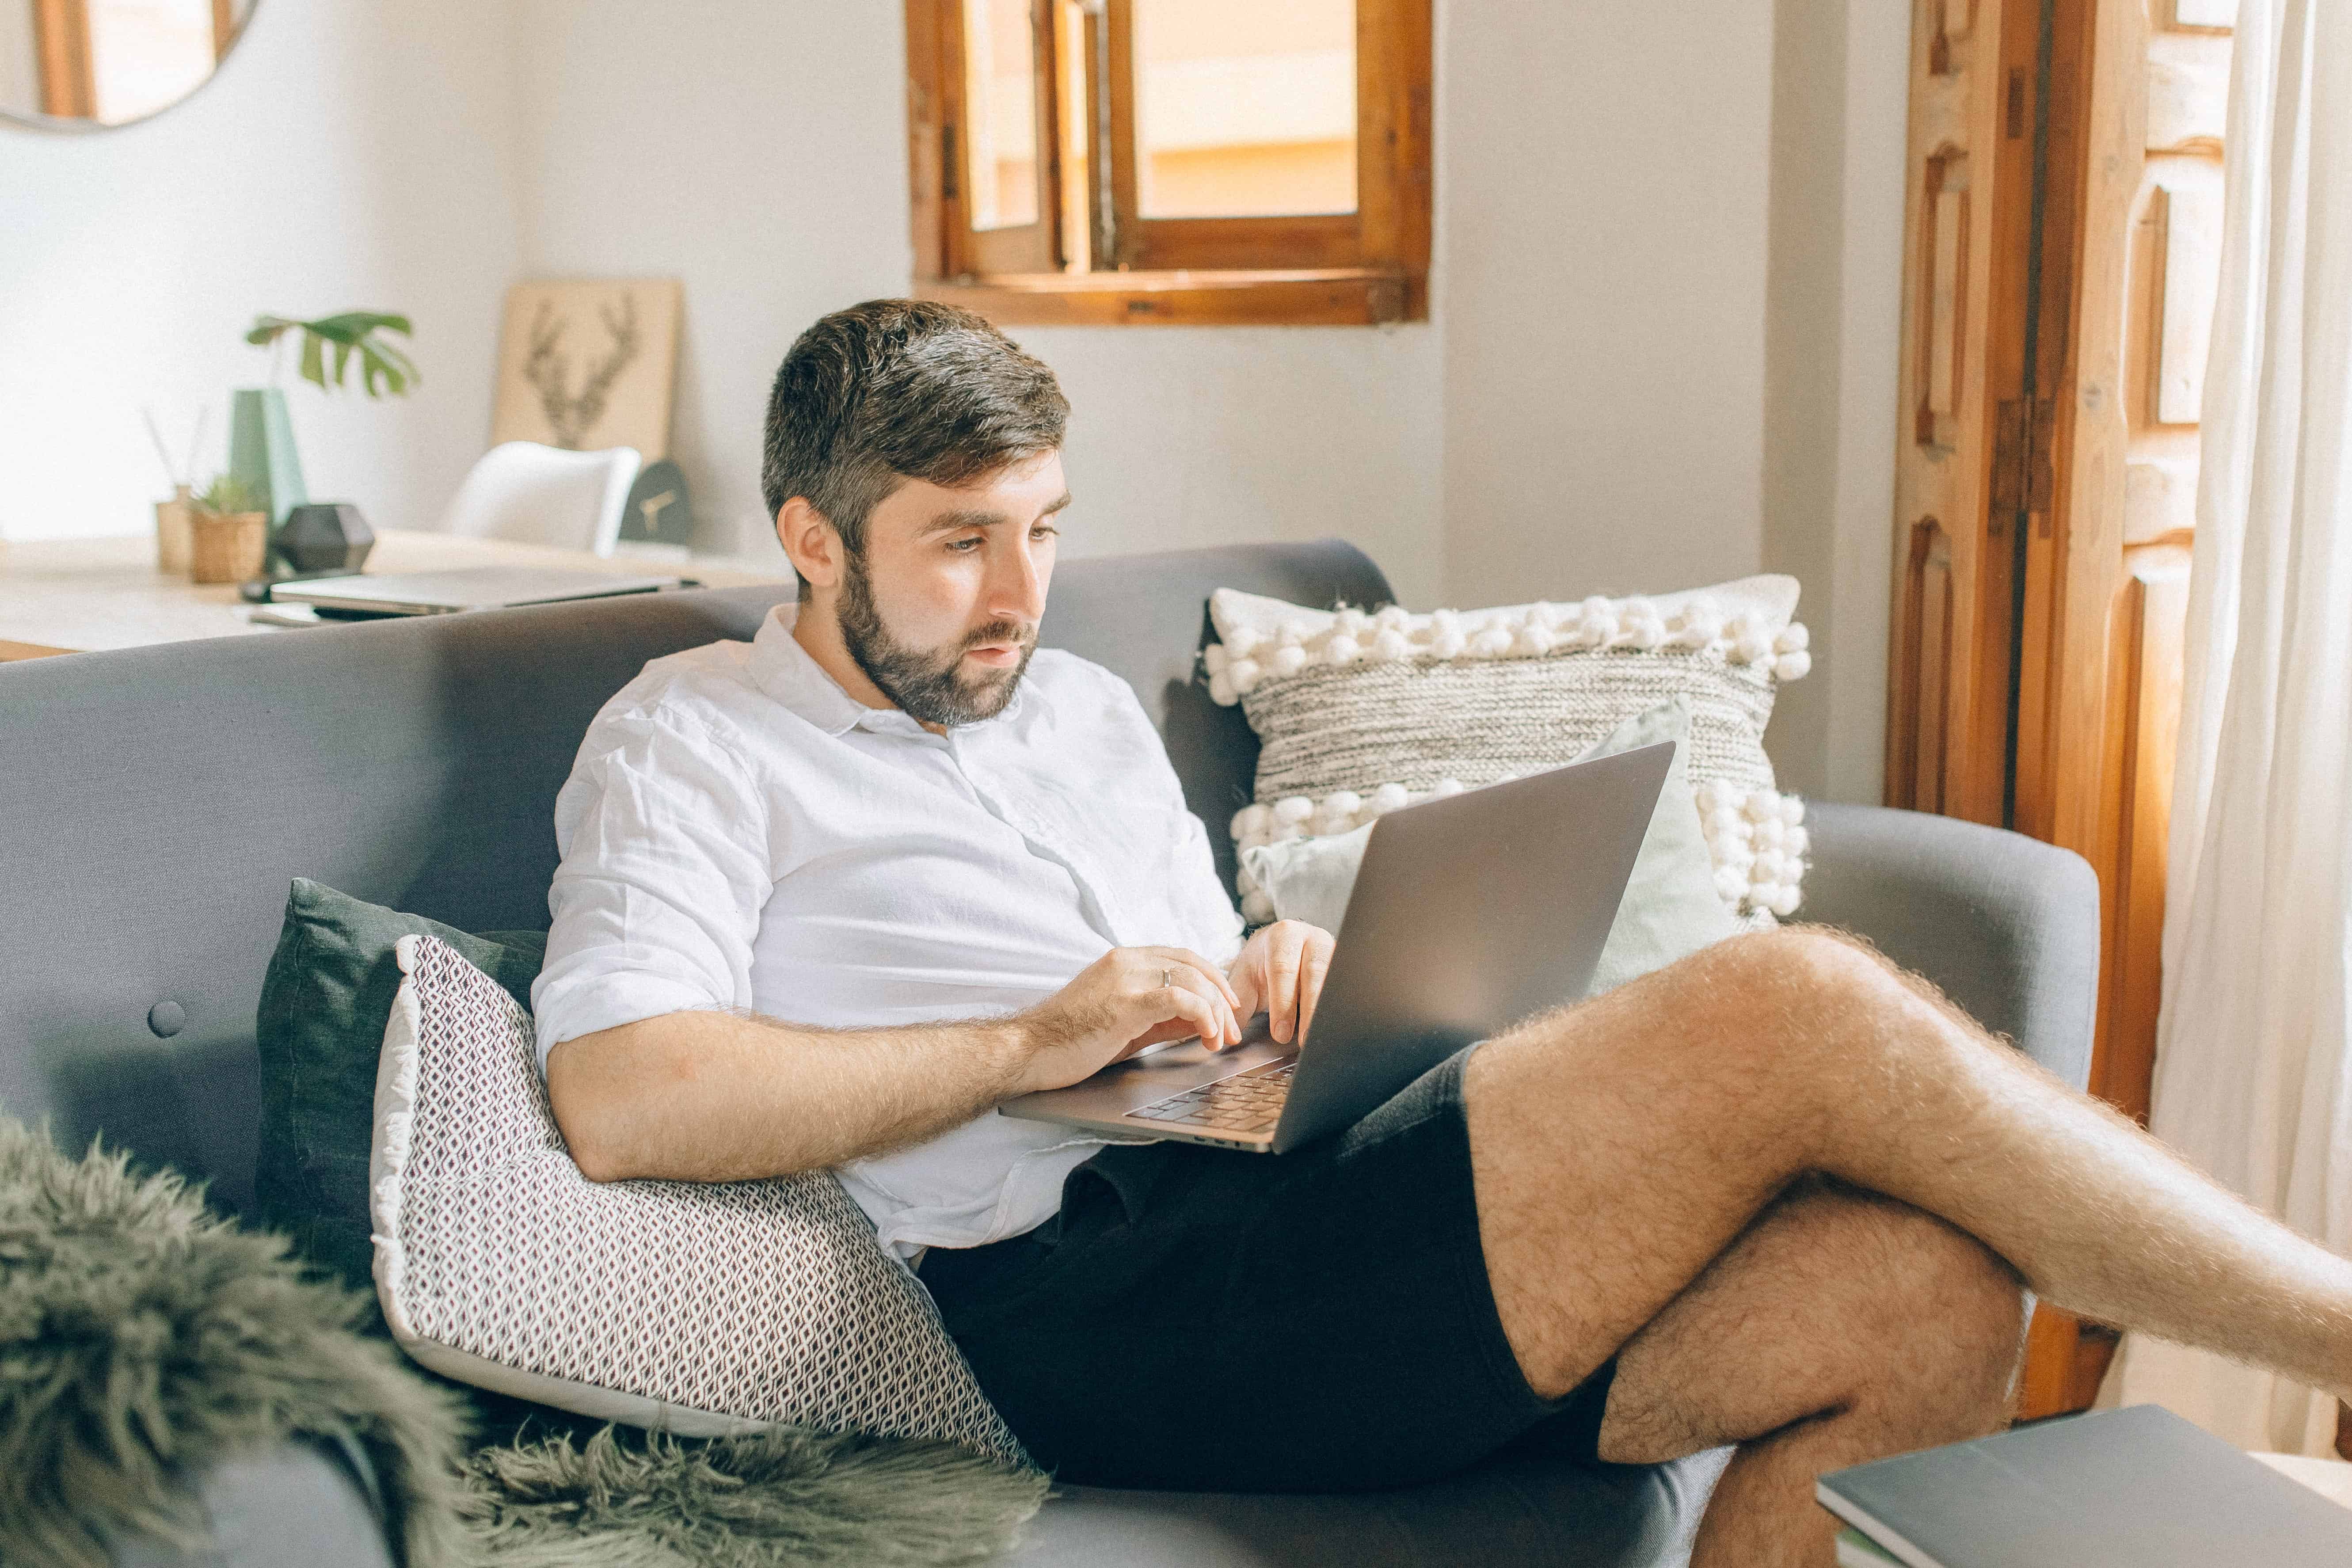 Man working on laptop on home couch